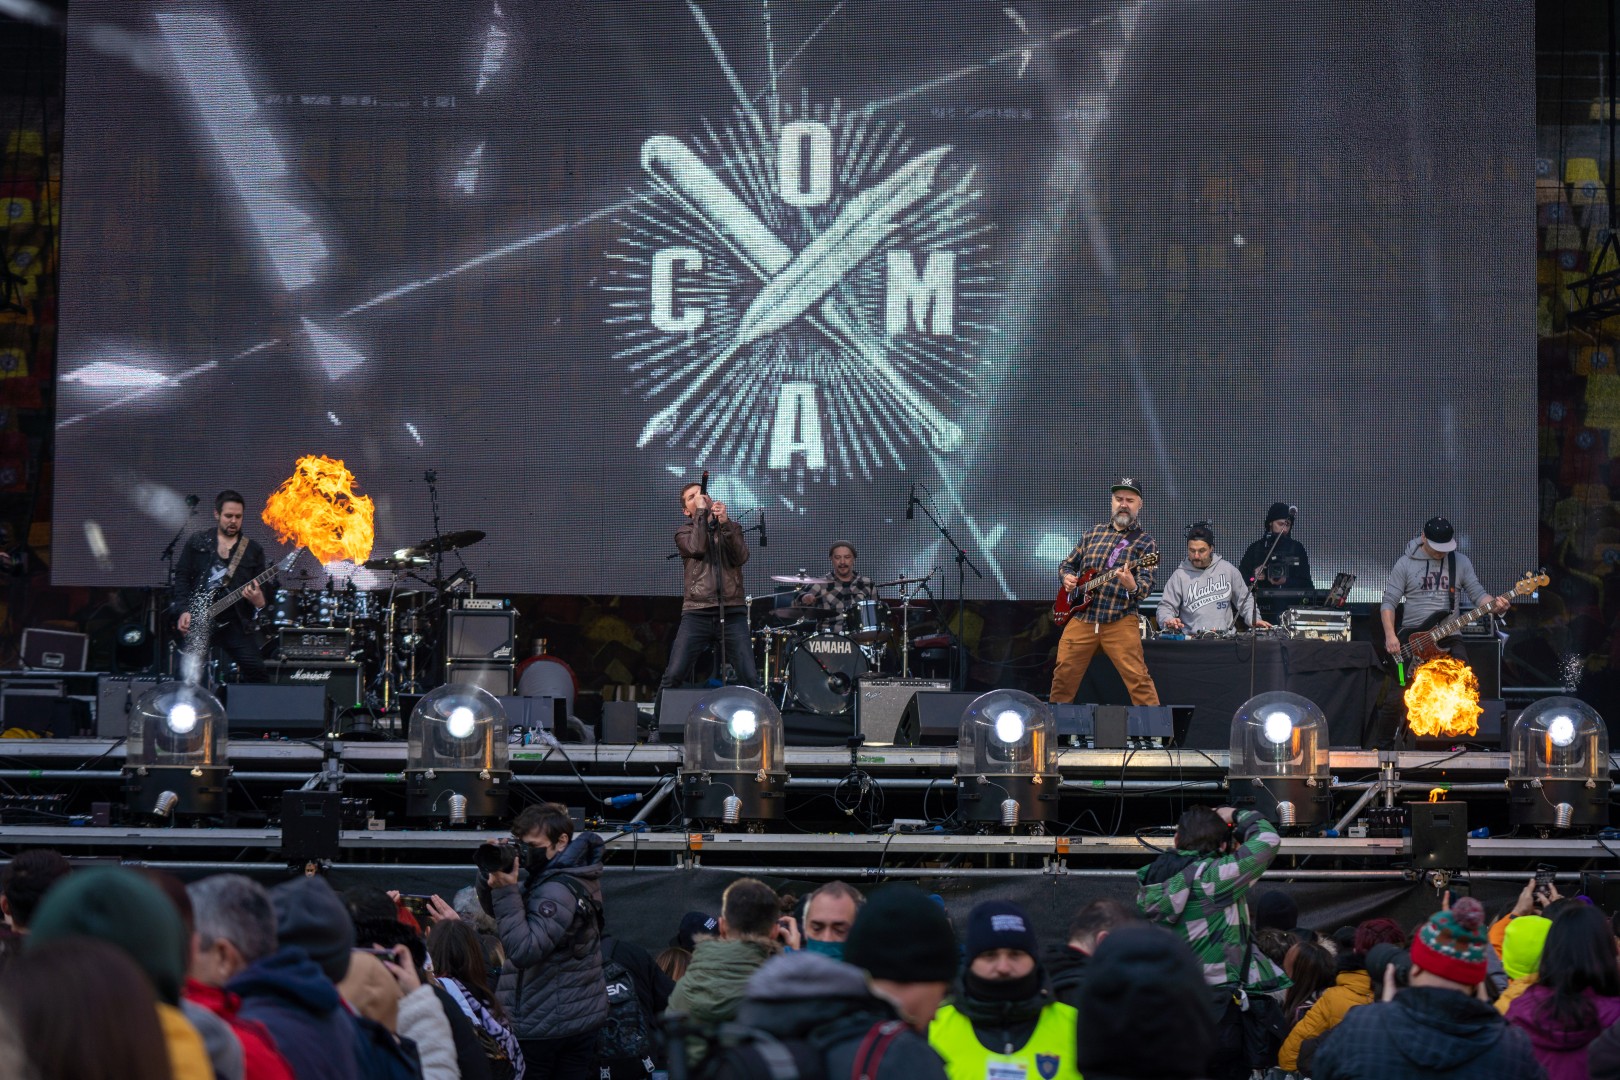 Coma at National Arena in Bucharest on March 12, 2022 (e94d62e6b0)